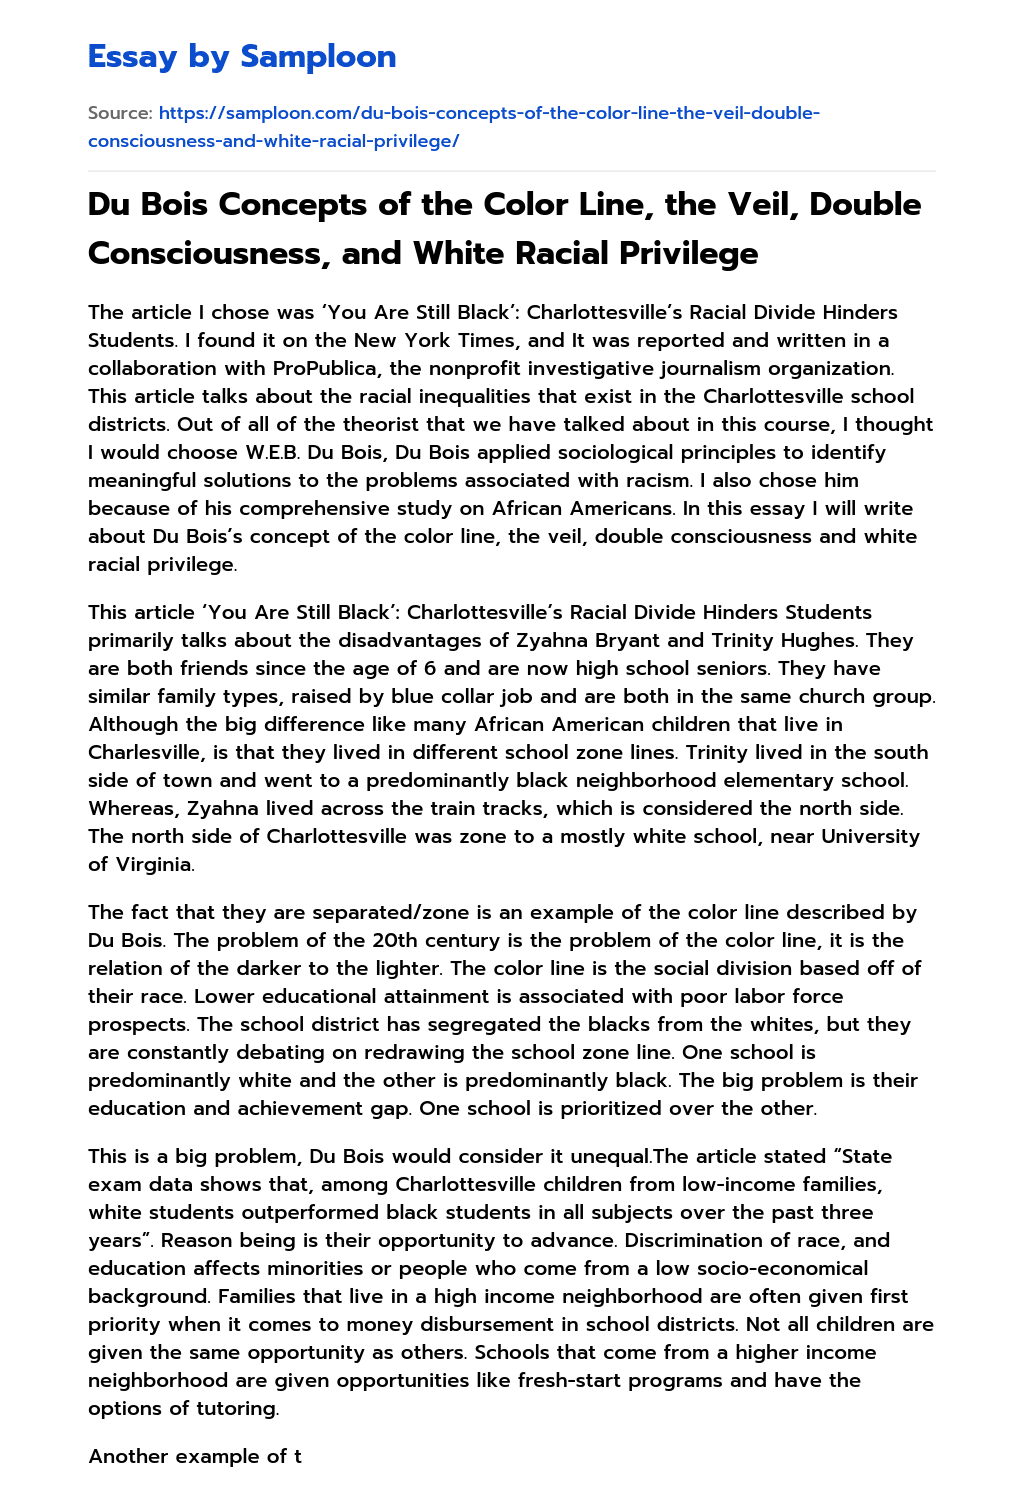 Du Bois Concepts of the Color Line, the Veil, Double Consciousness, and White Racial Privilege essay